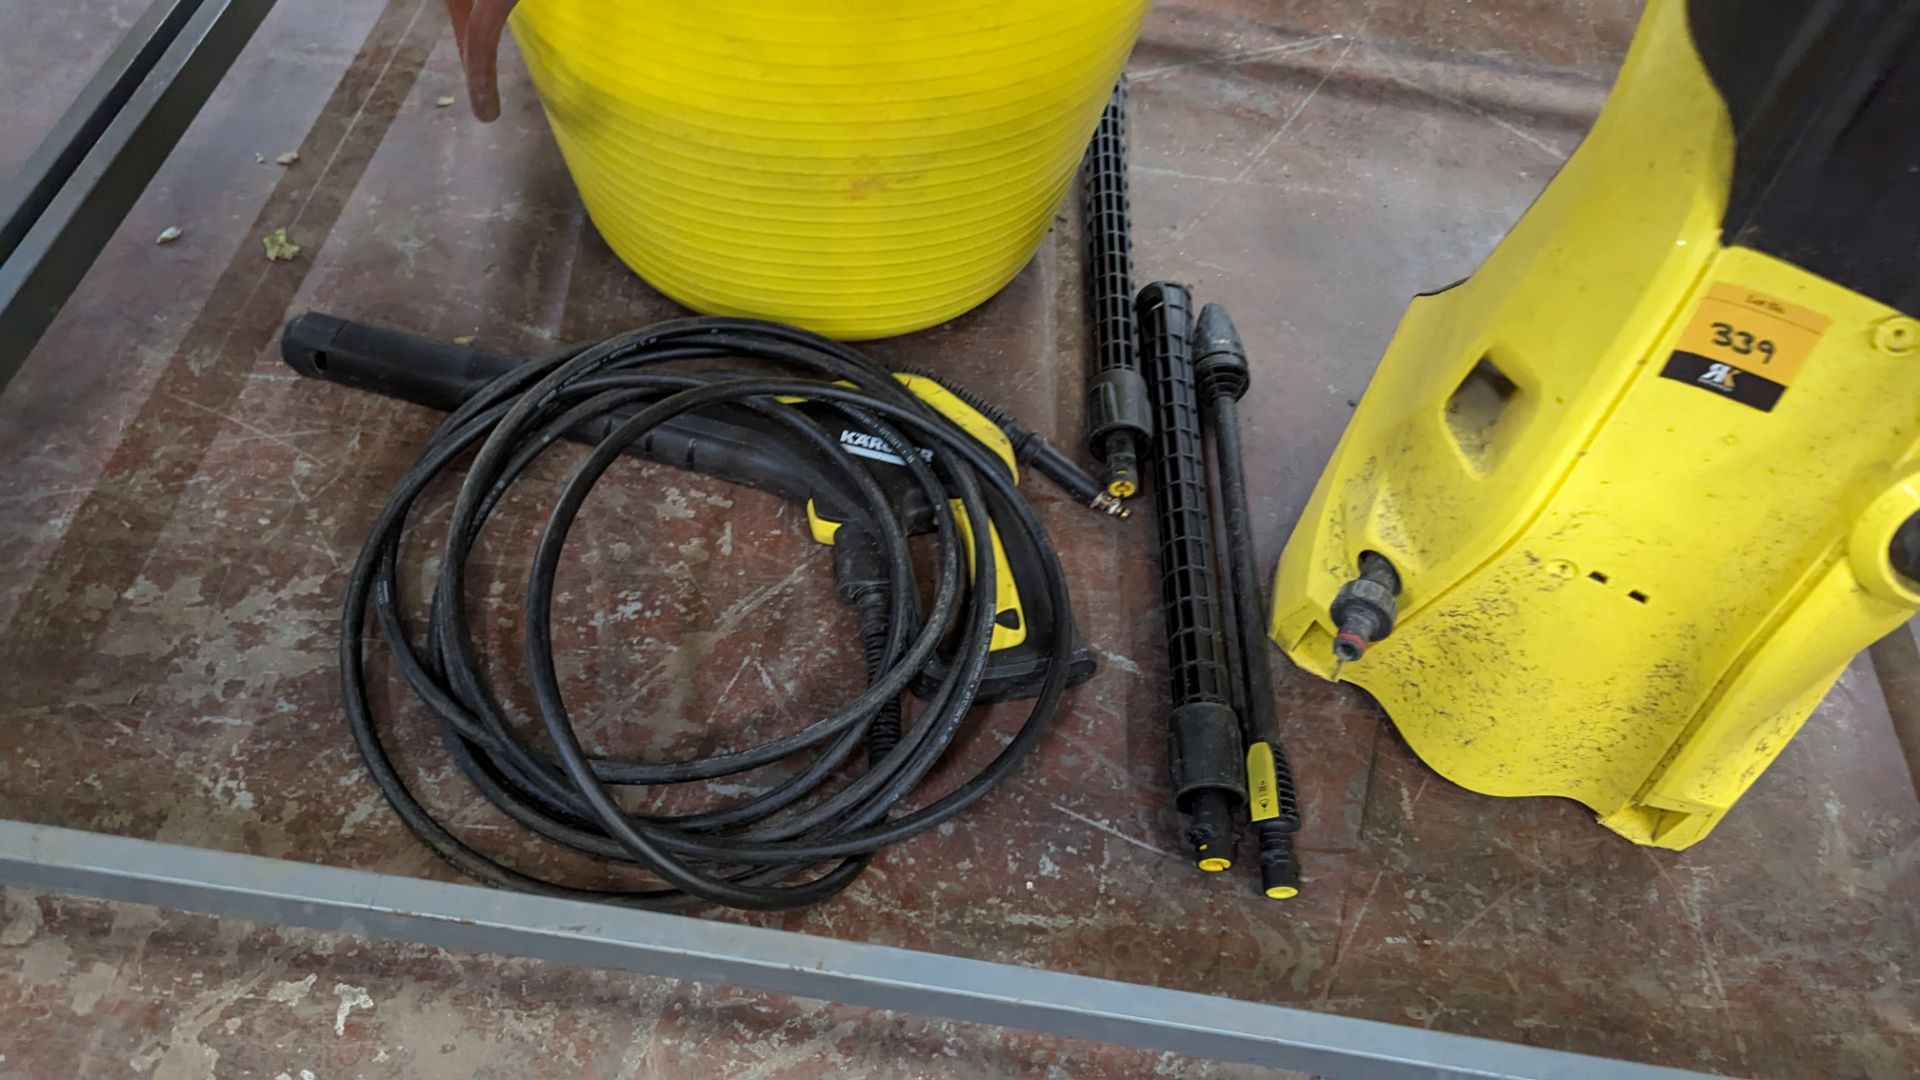 Karcher pressure washer including attachments plus bucket & contents - the total contents of the bay - Image 5 of 7